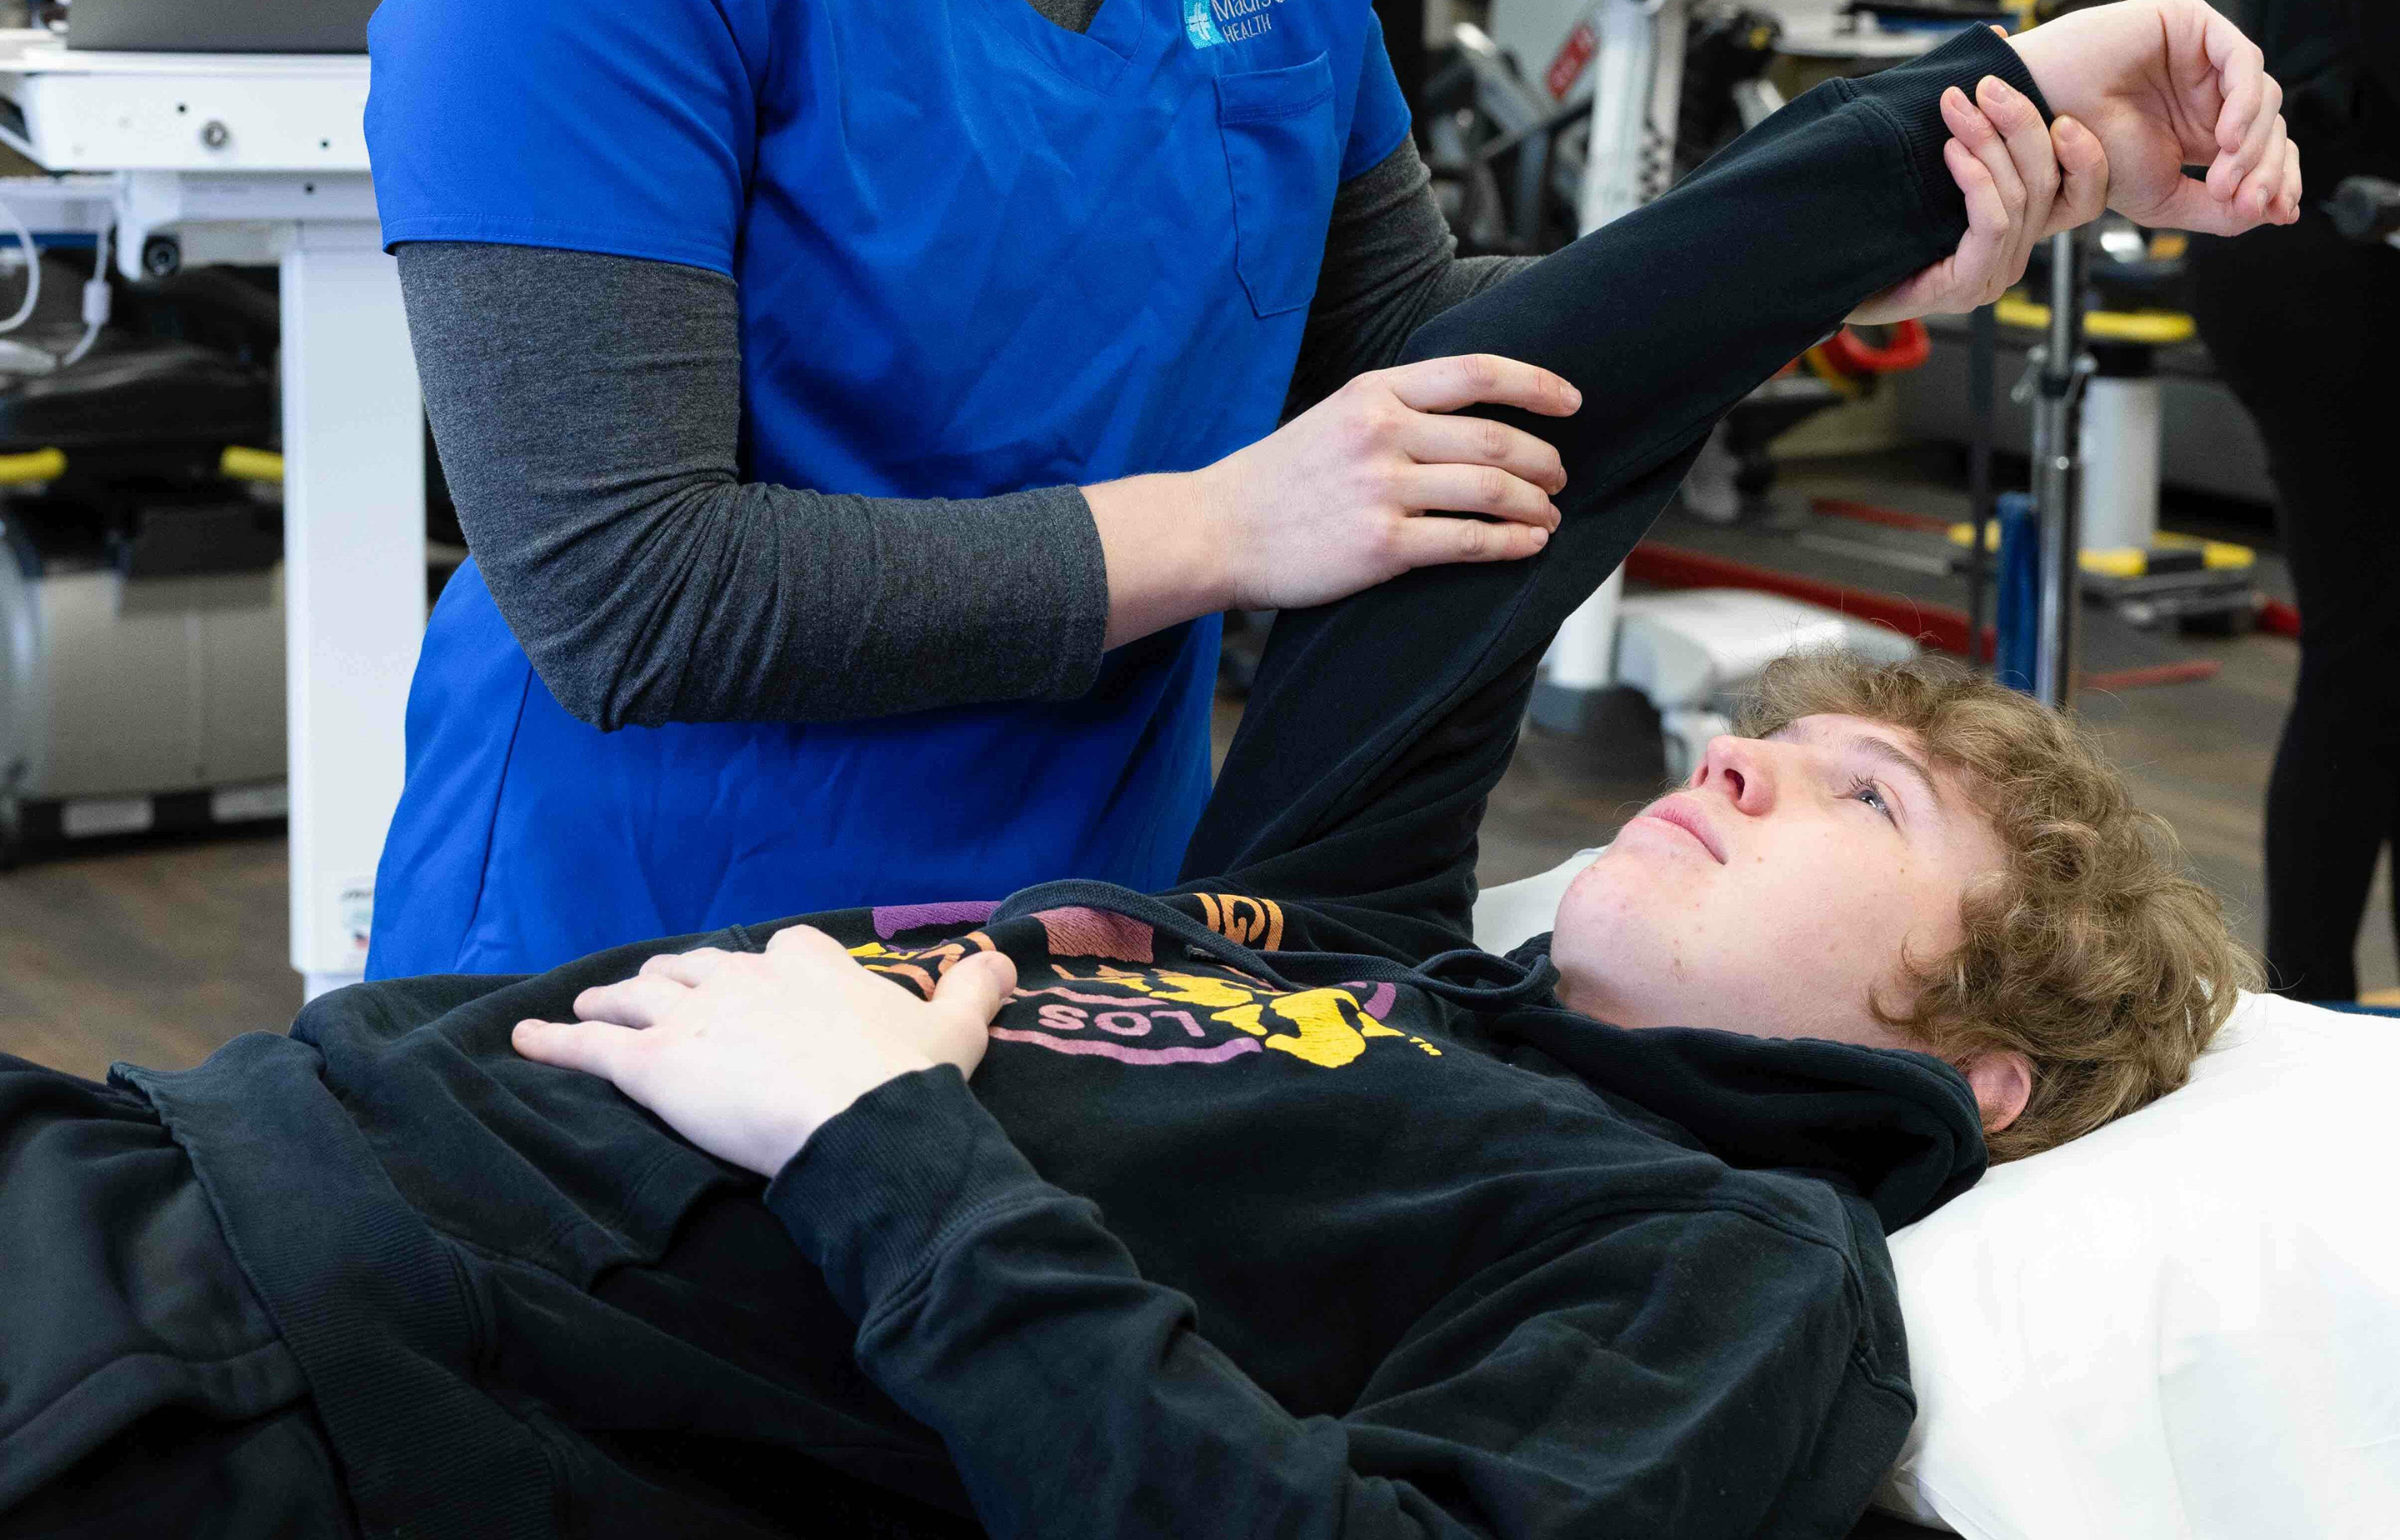 Madison Health Physical Therapy, therapist raising patient's arm while patient is laying down